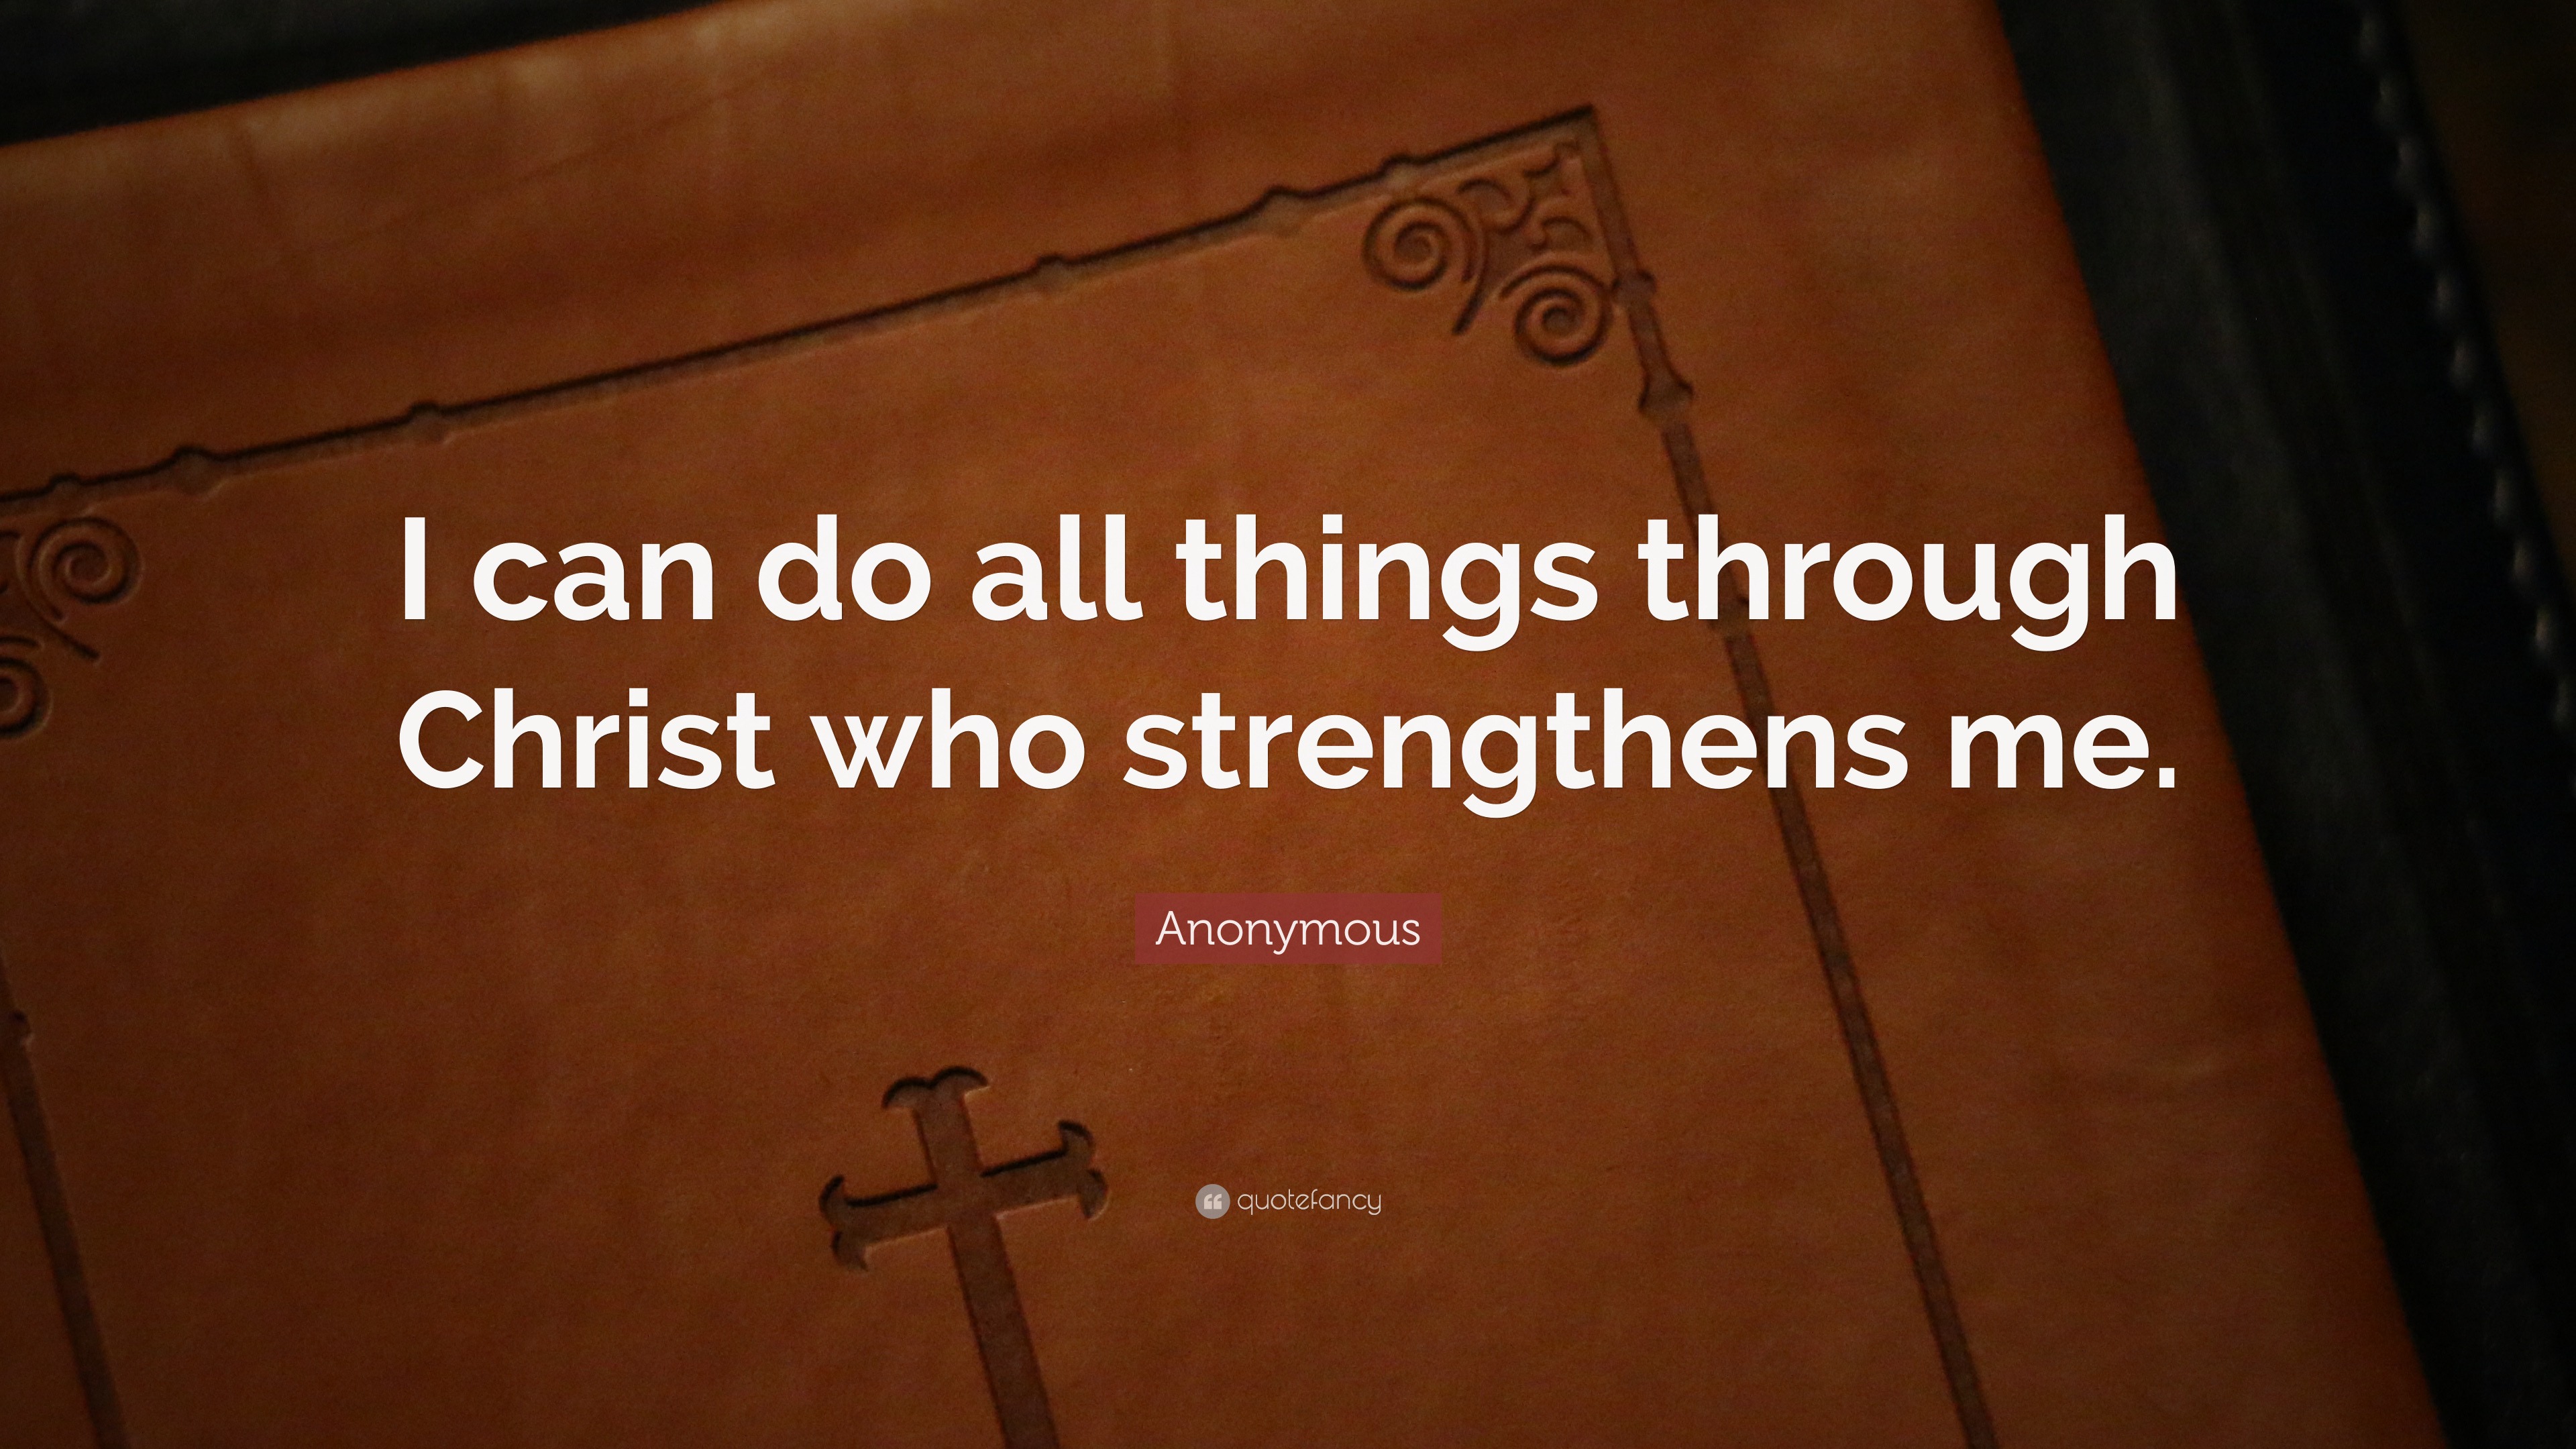 Anonymous Quote: “I can do all things through Christ who strengthens me